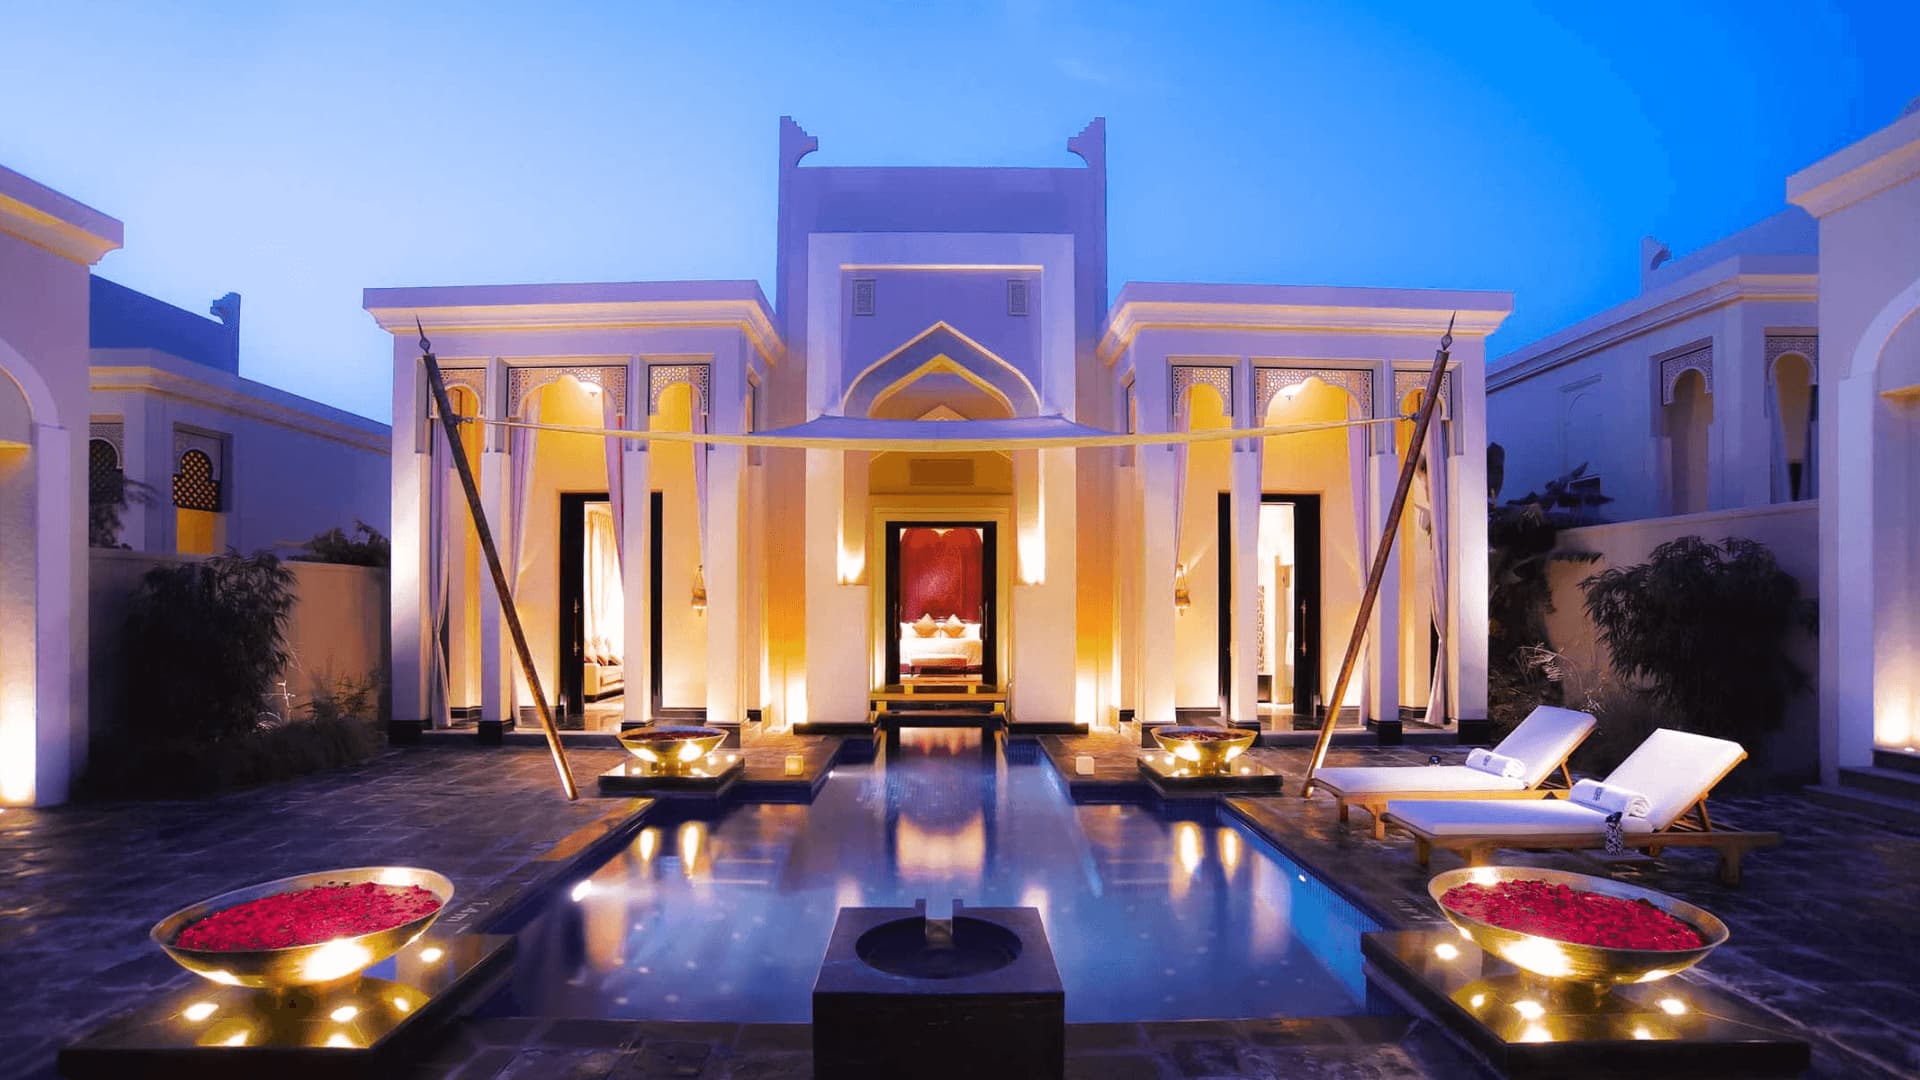 AI Areen Spa is formed with inspiration from the gardens of the Royal Arabian palaces